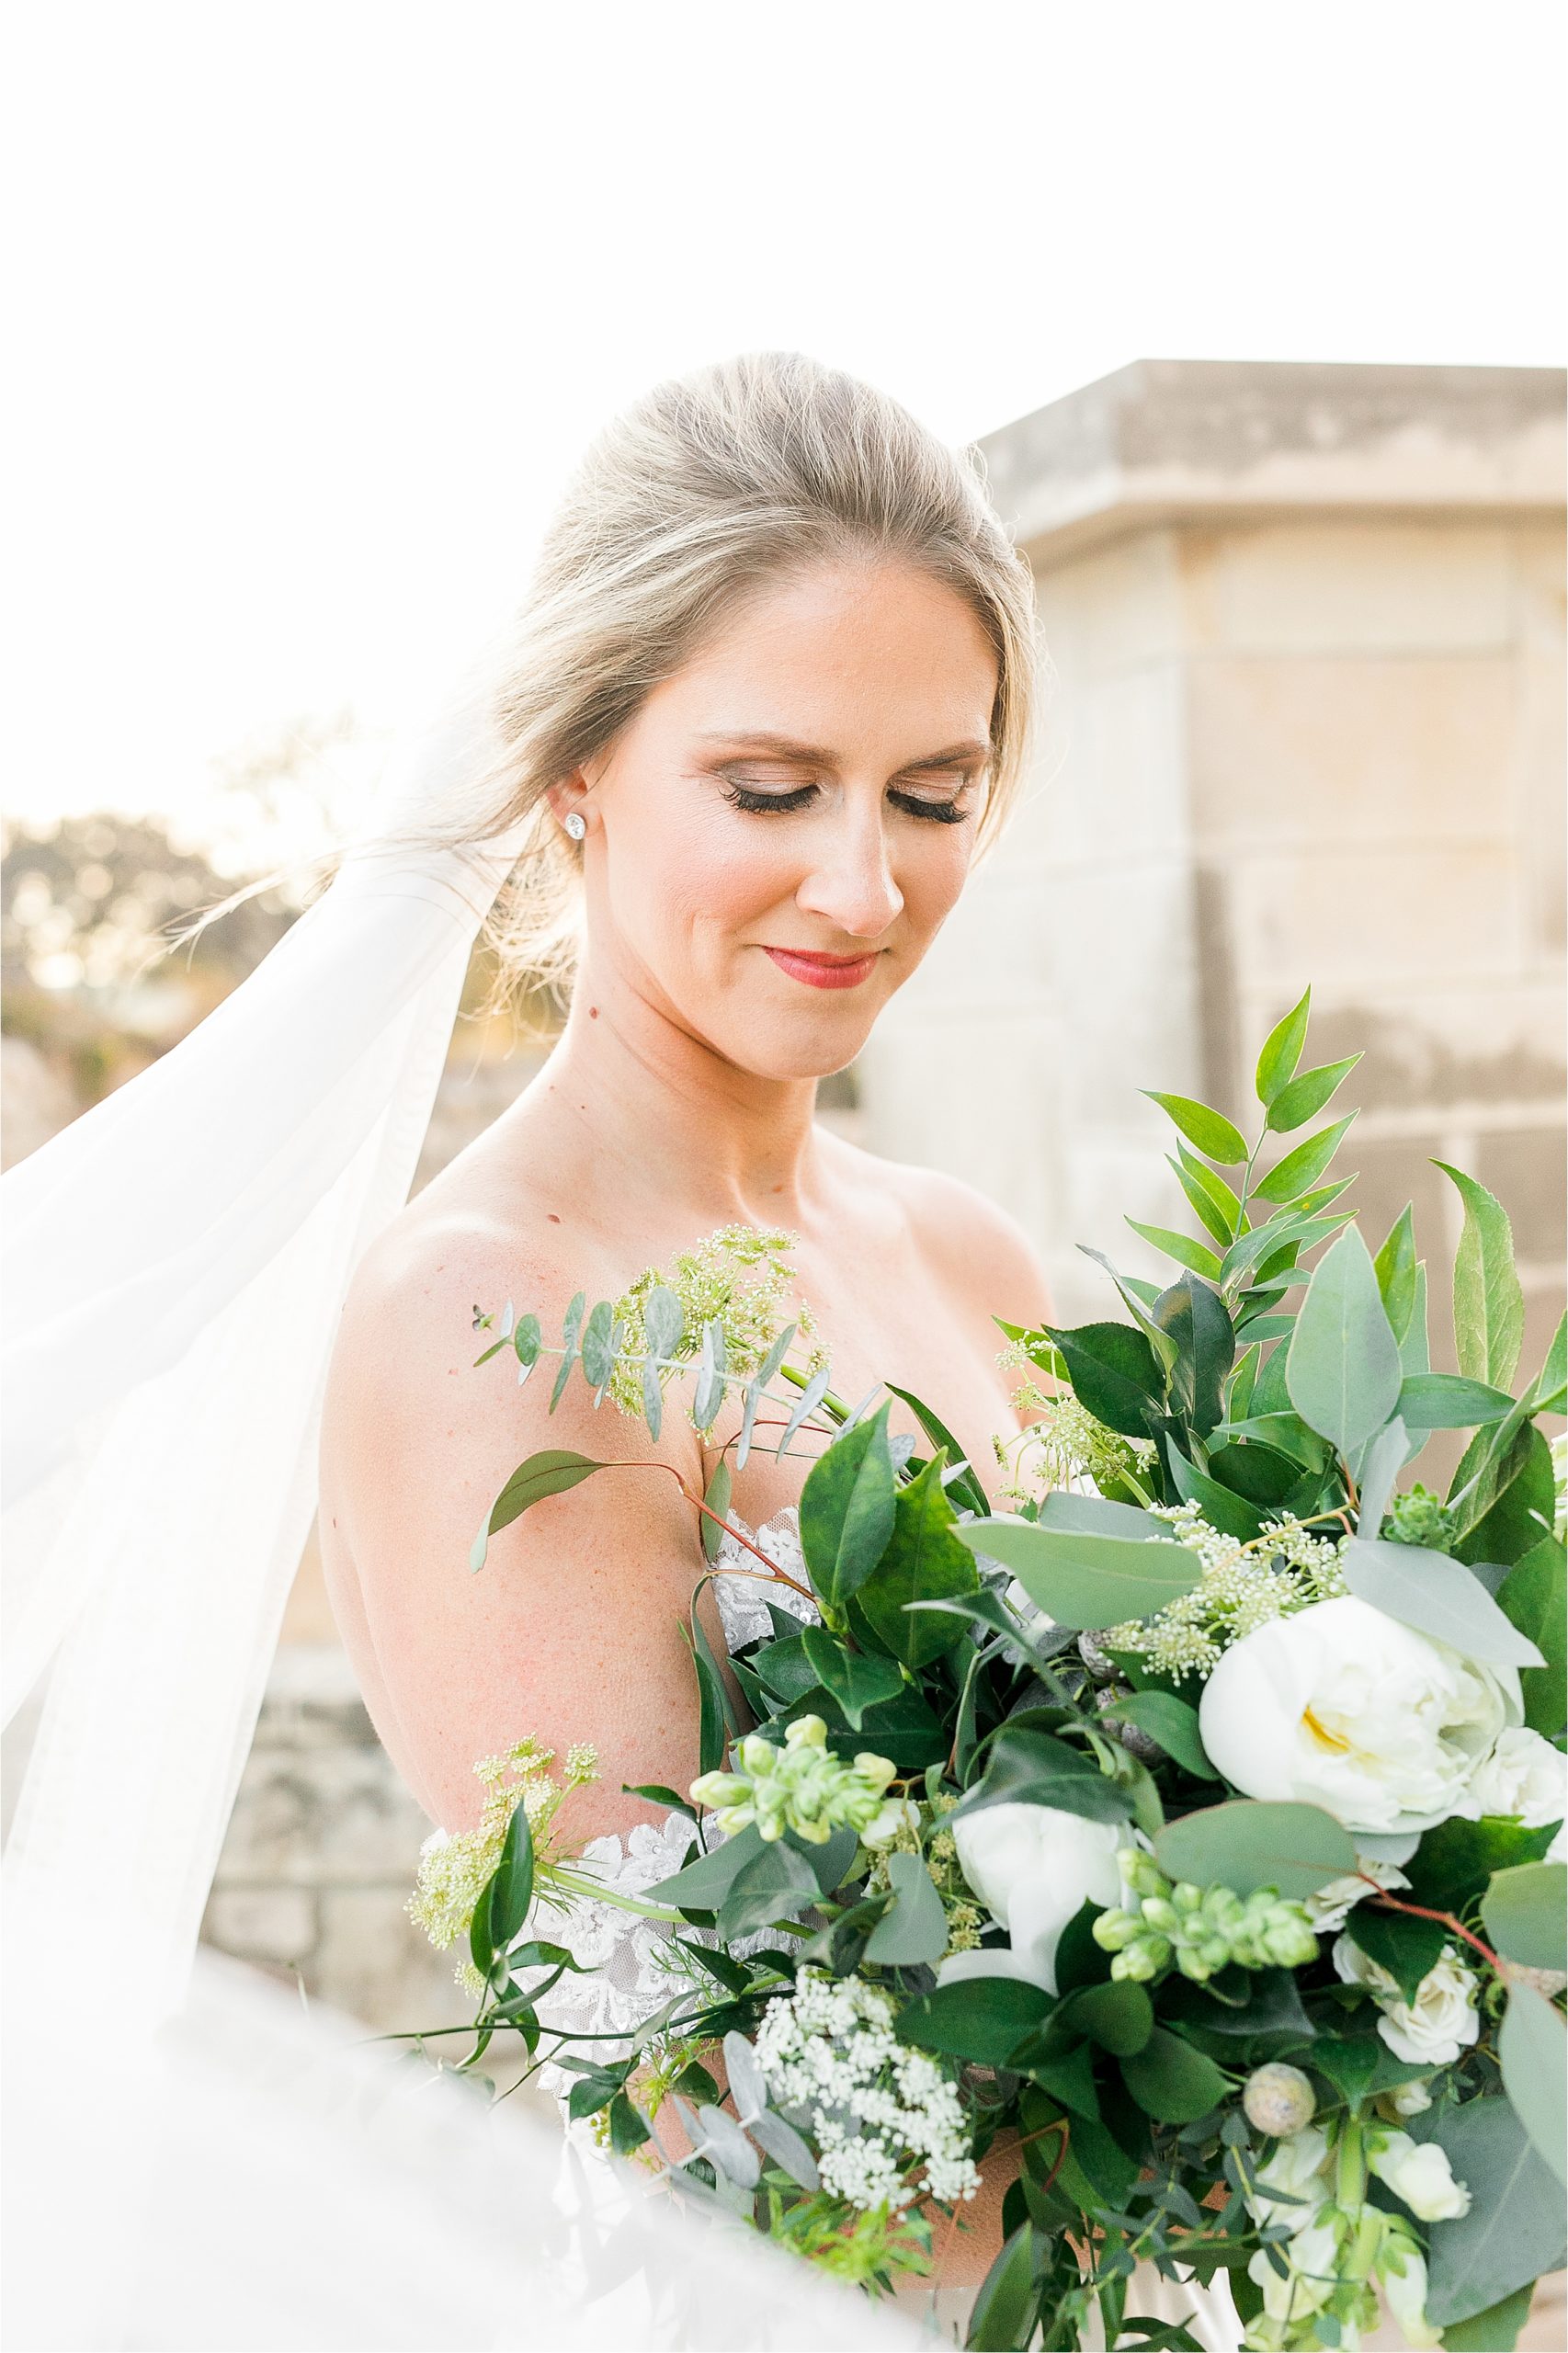 A bride with her hair pulled back shares a soft smile and looks down at her flowers with a veil behind during her warm, winter bridal portraits at adriatica village in McKinney, Texas with Austin Wedding Photographer Jilian Hogan 